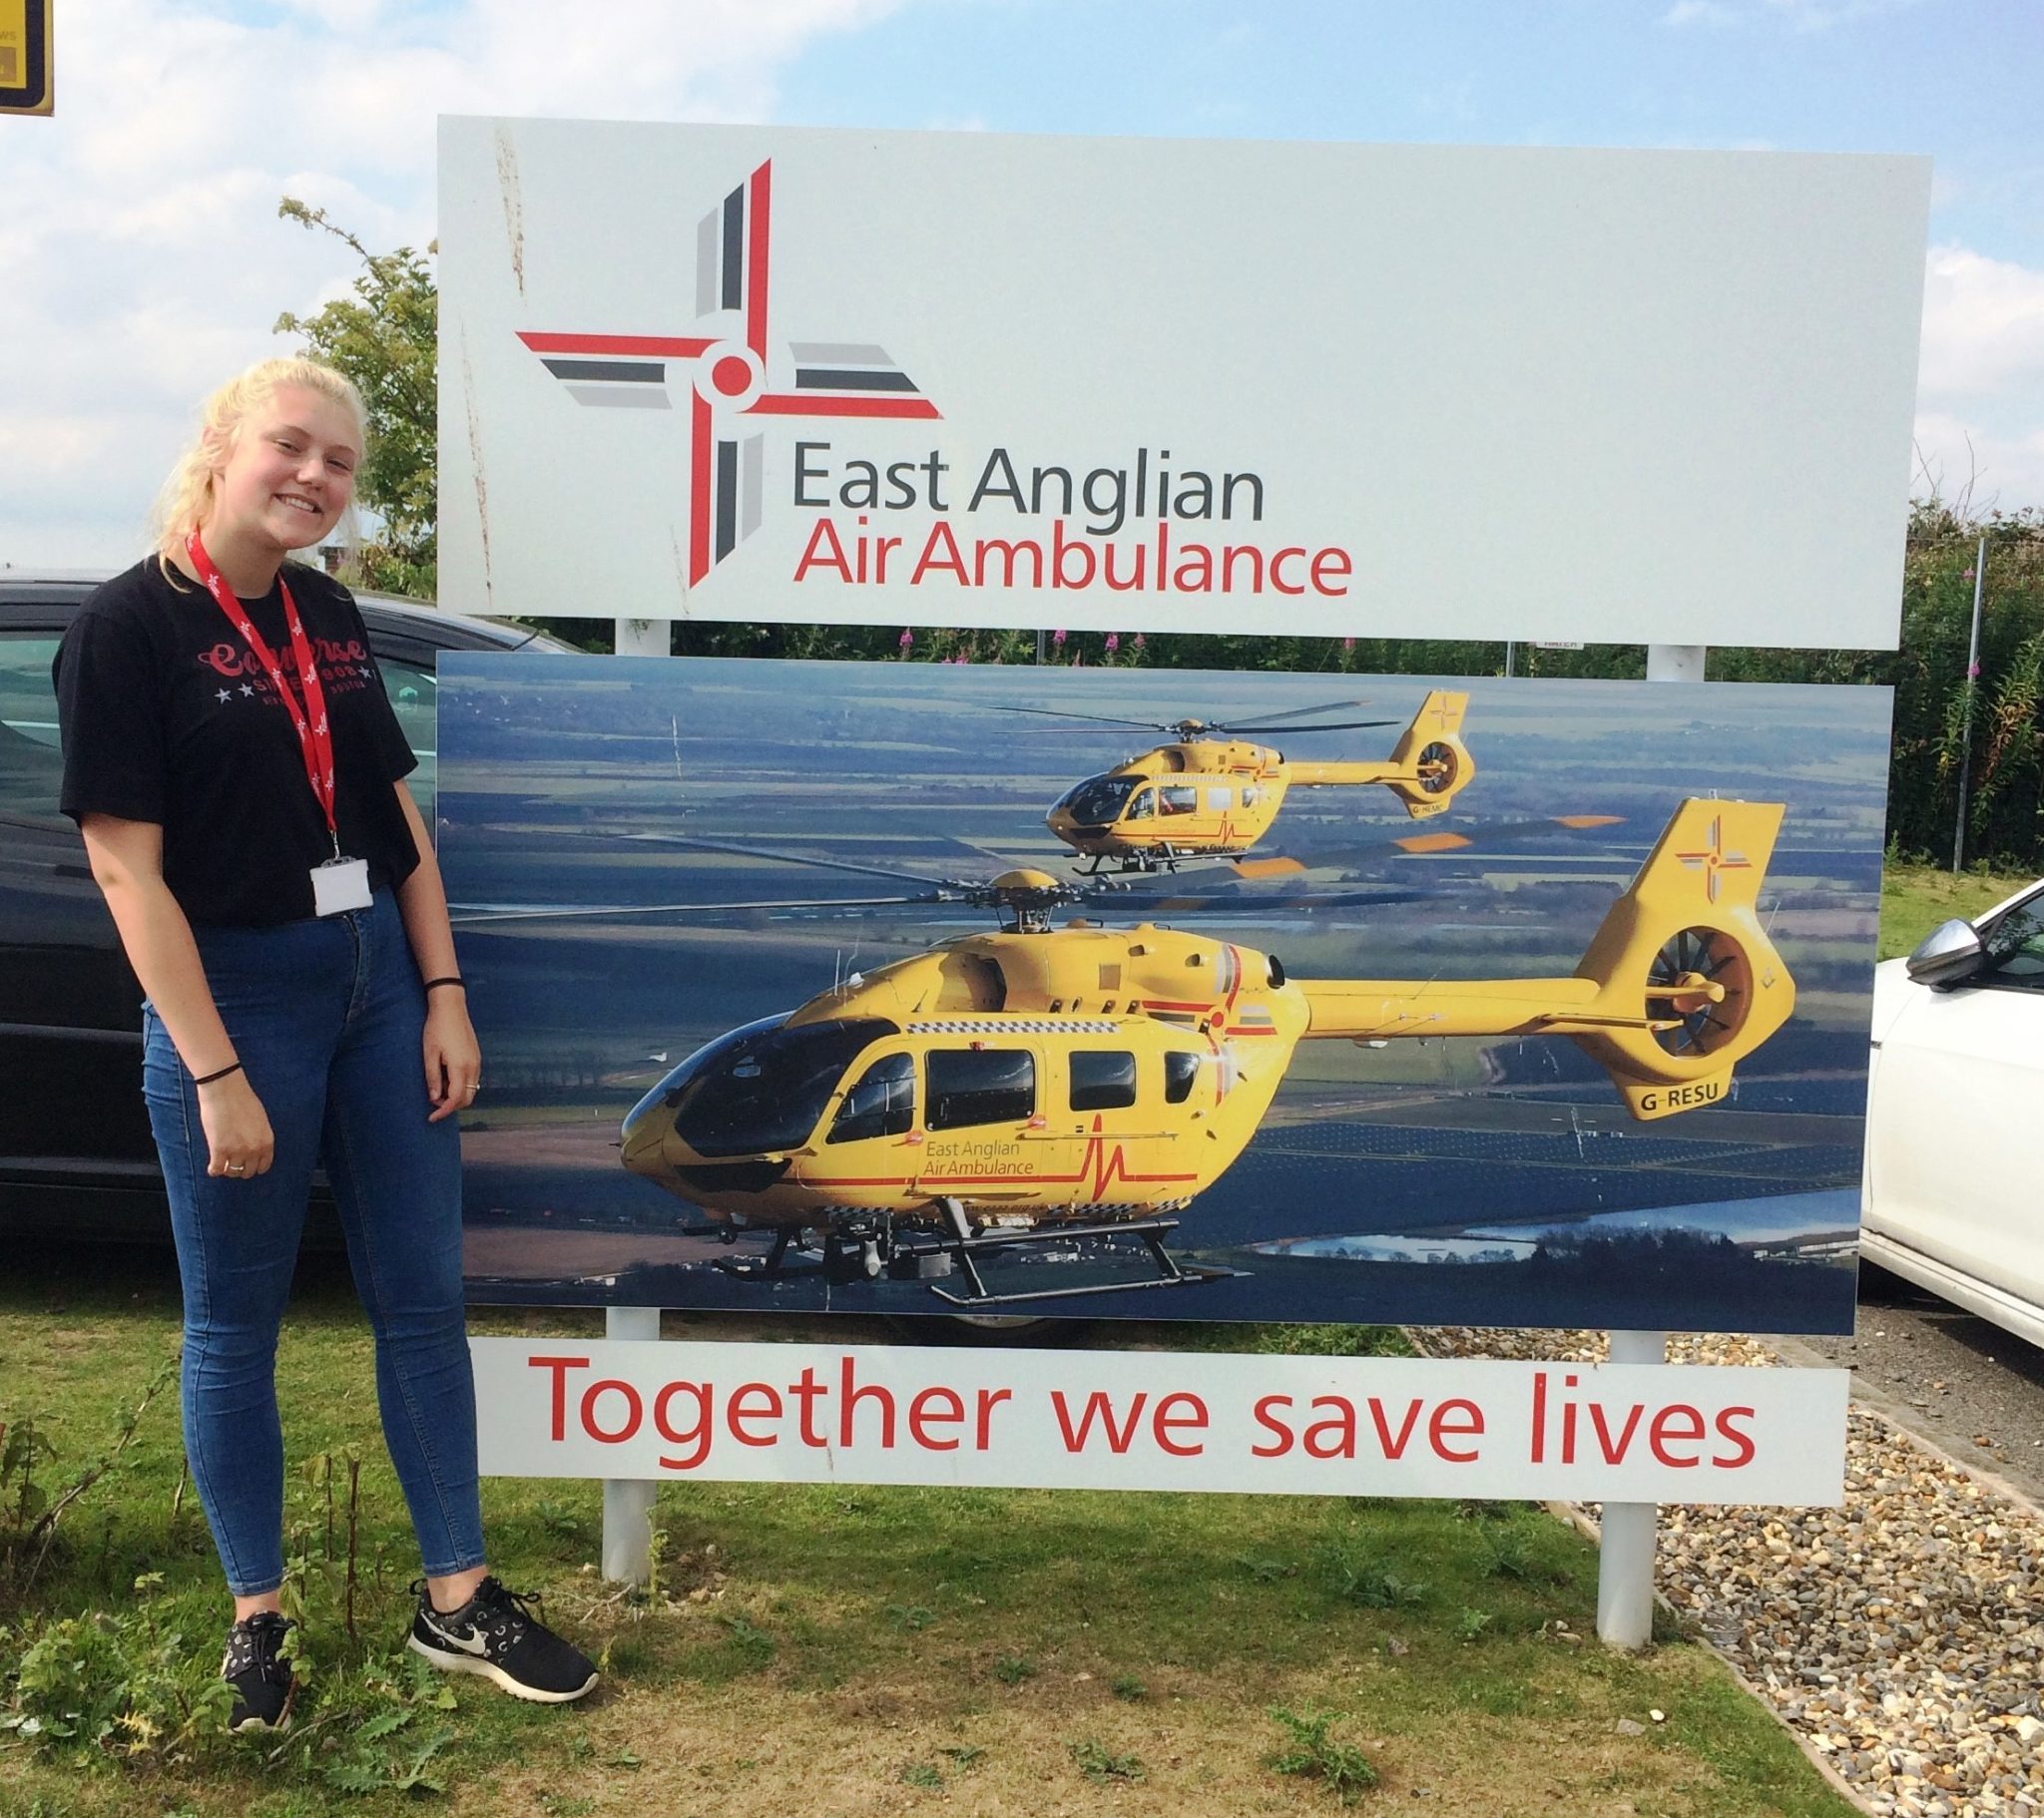 Blue Skies opens eyes to life-saving career opportunity